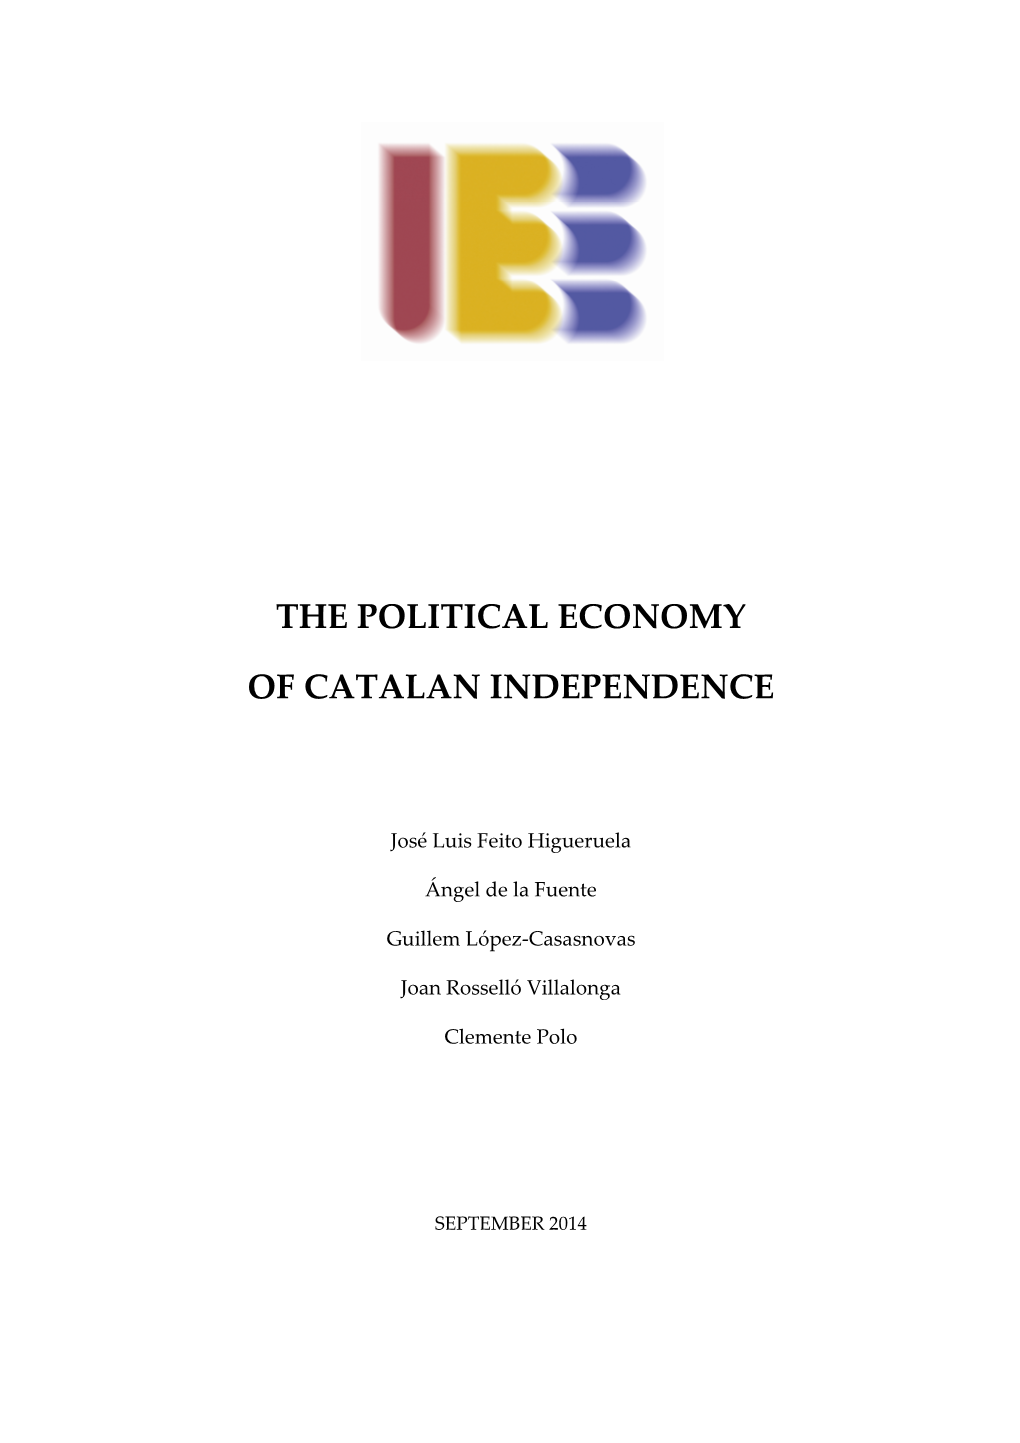 The Political Economy of Catalan Independence